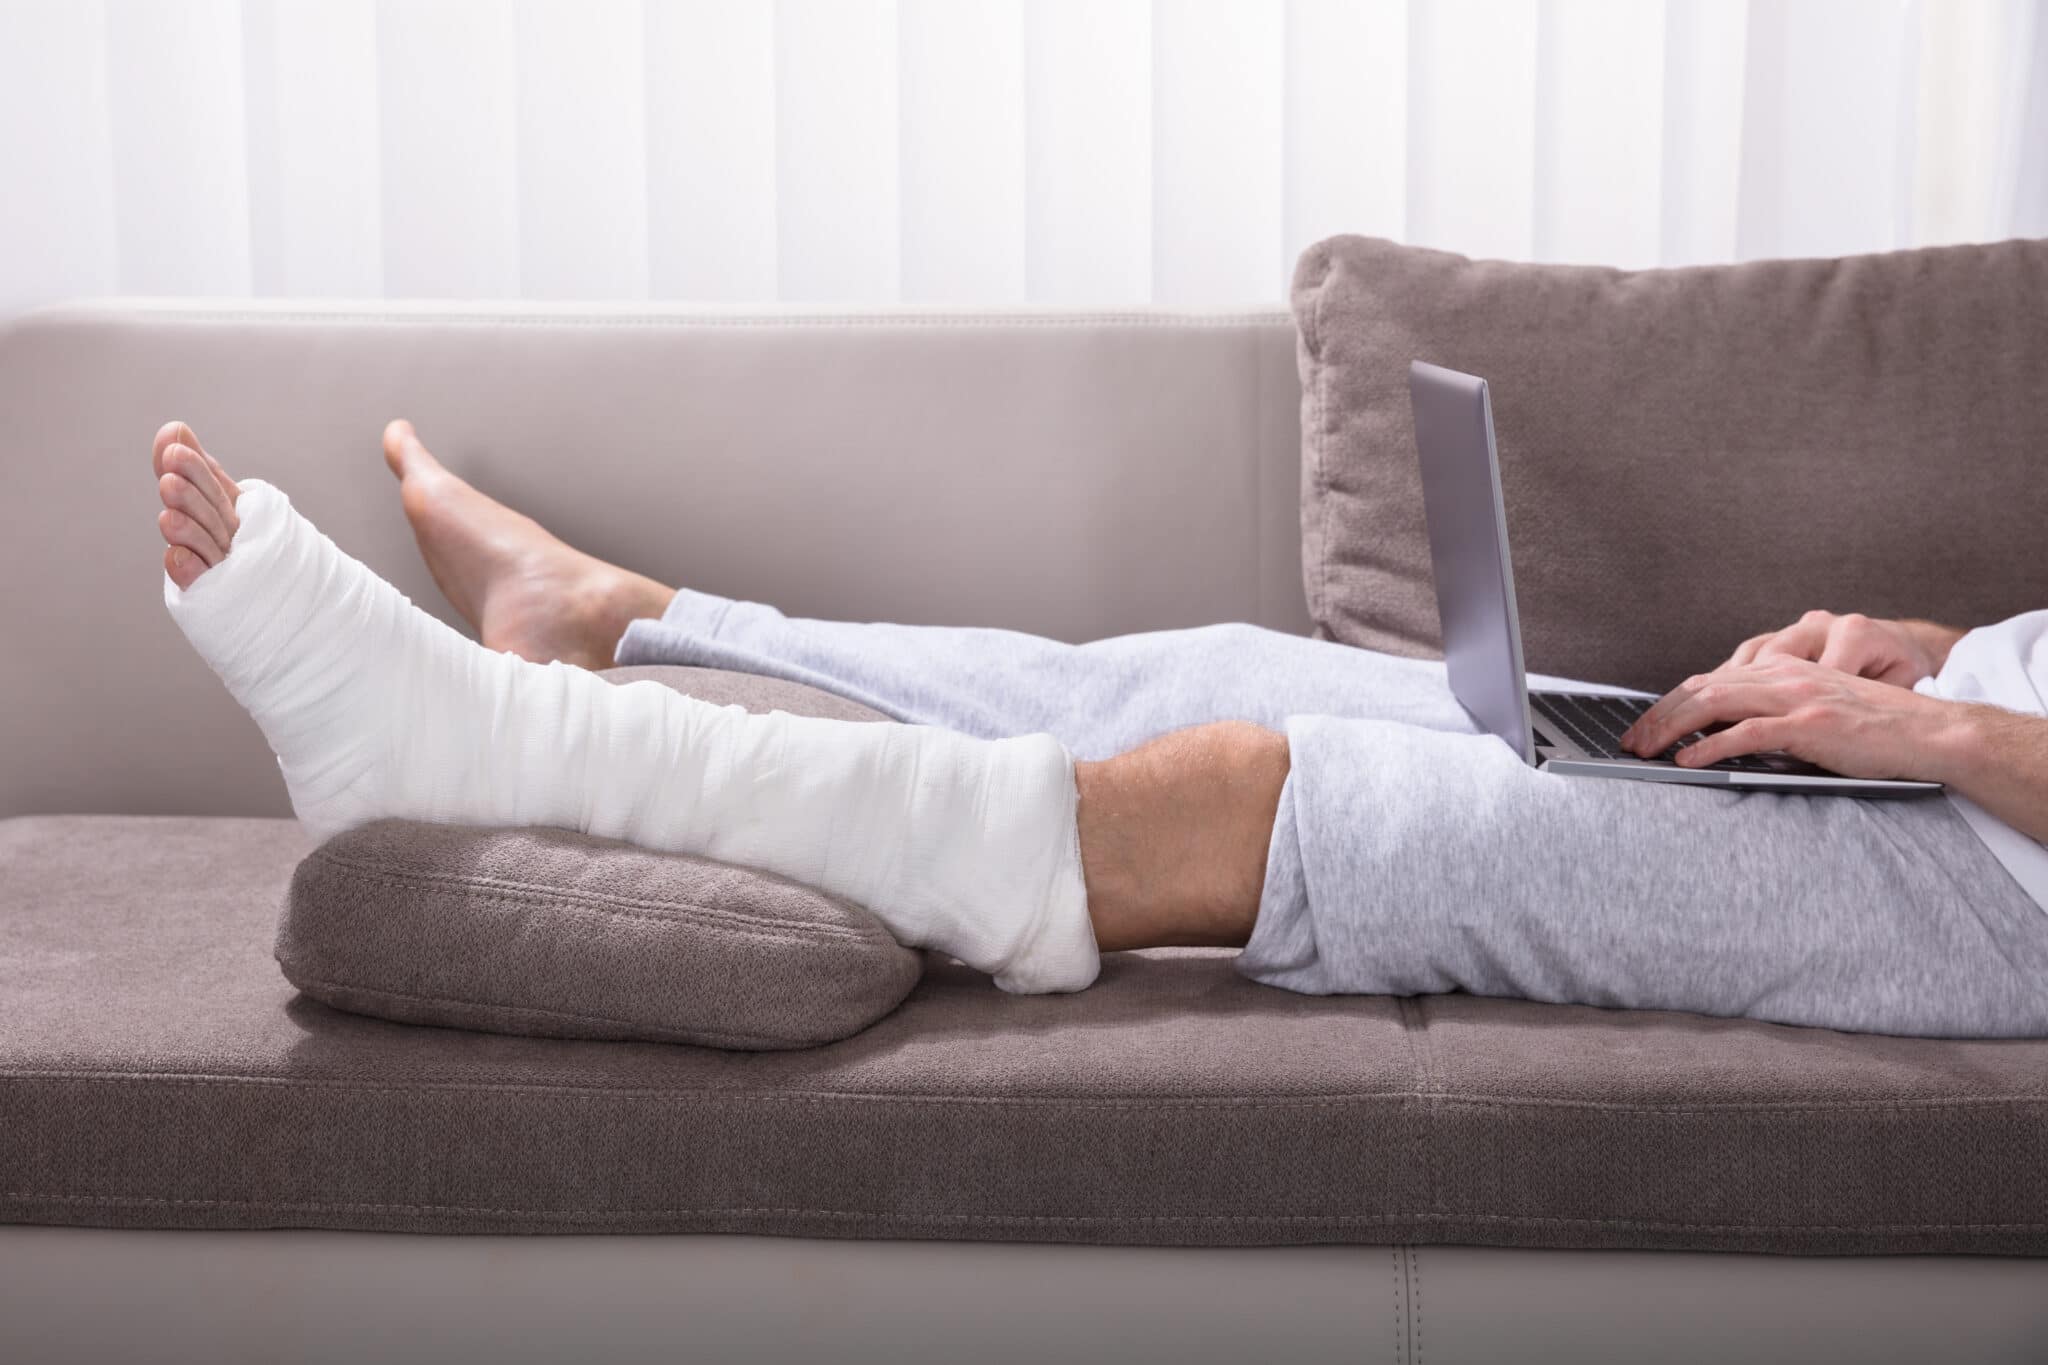 Man with broken leg sitting on couch